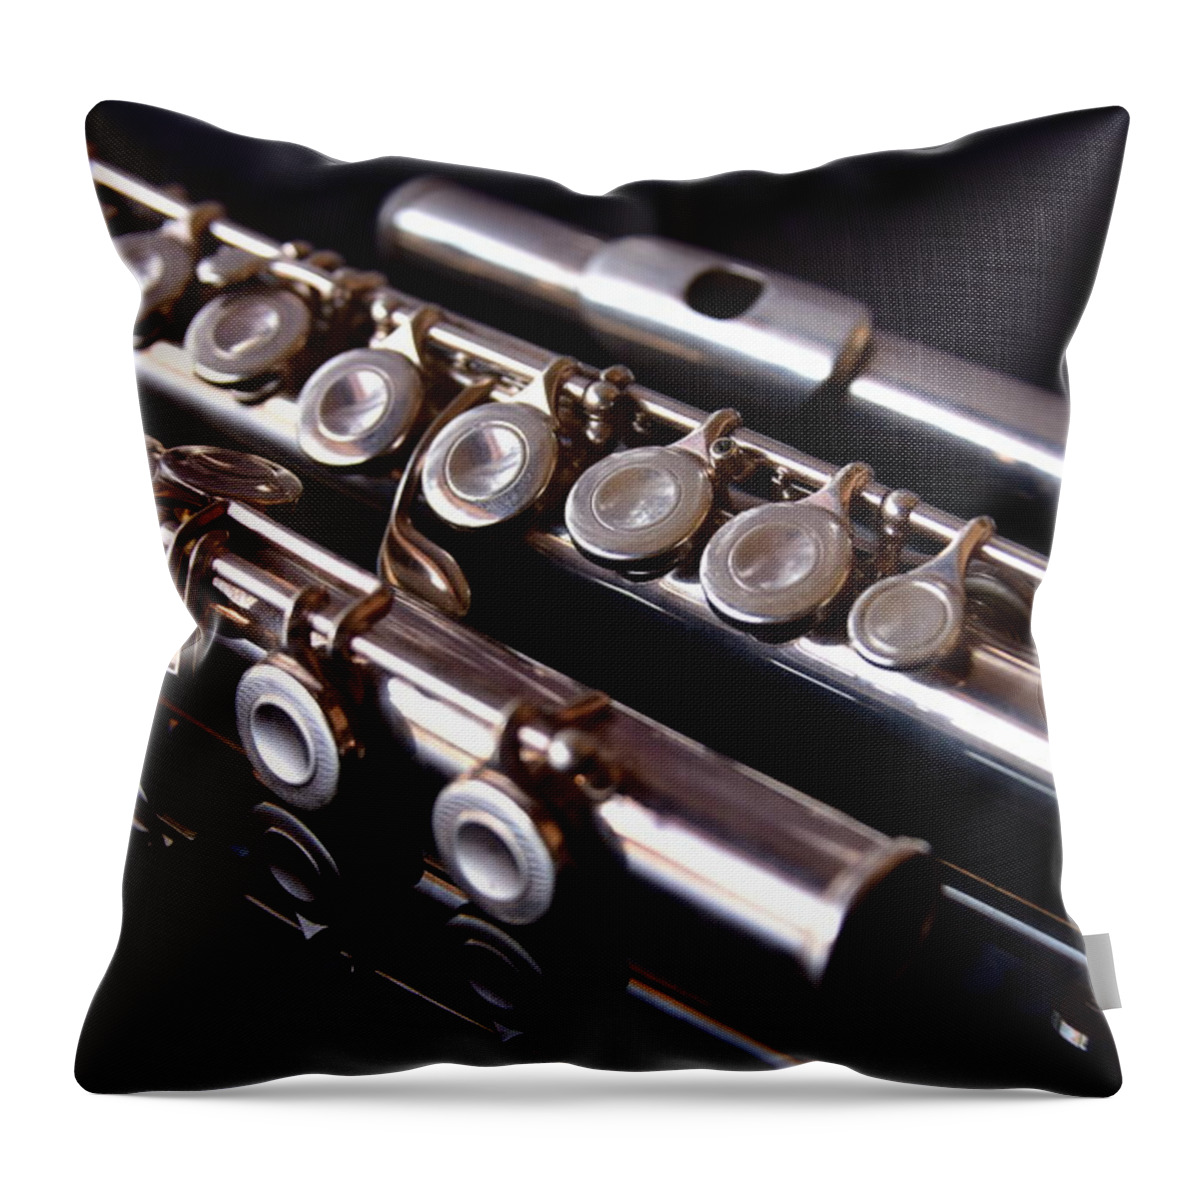 Concert Flute Throw Pillow featuring the photograph Concert Flute by Neil R Finlay